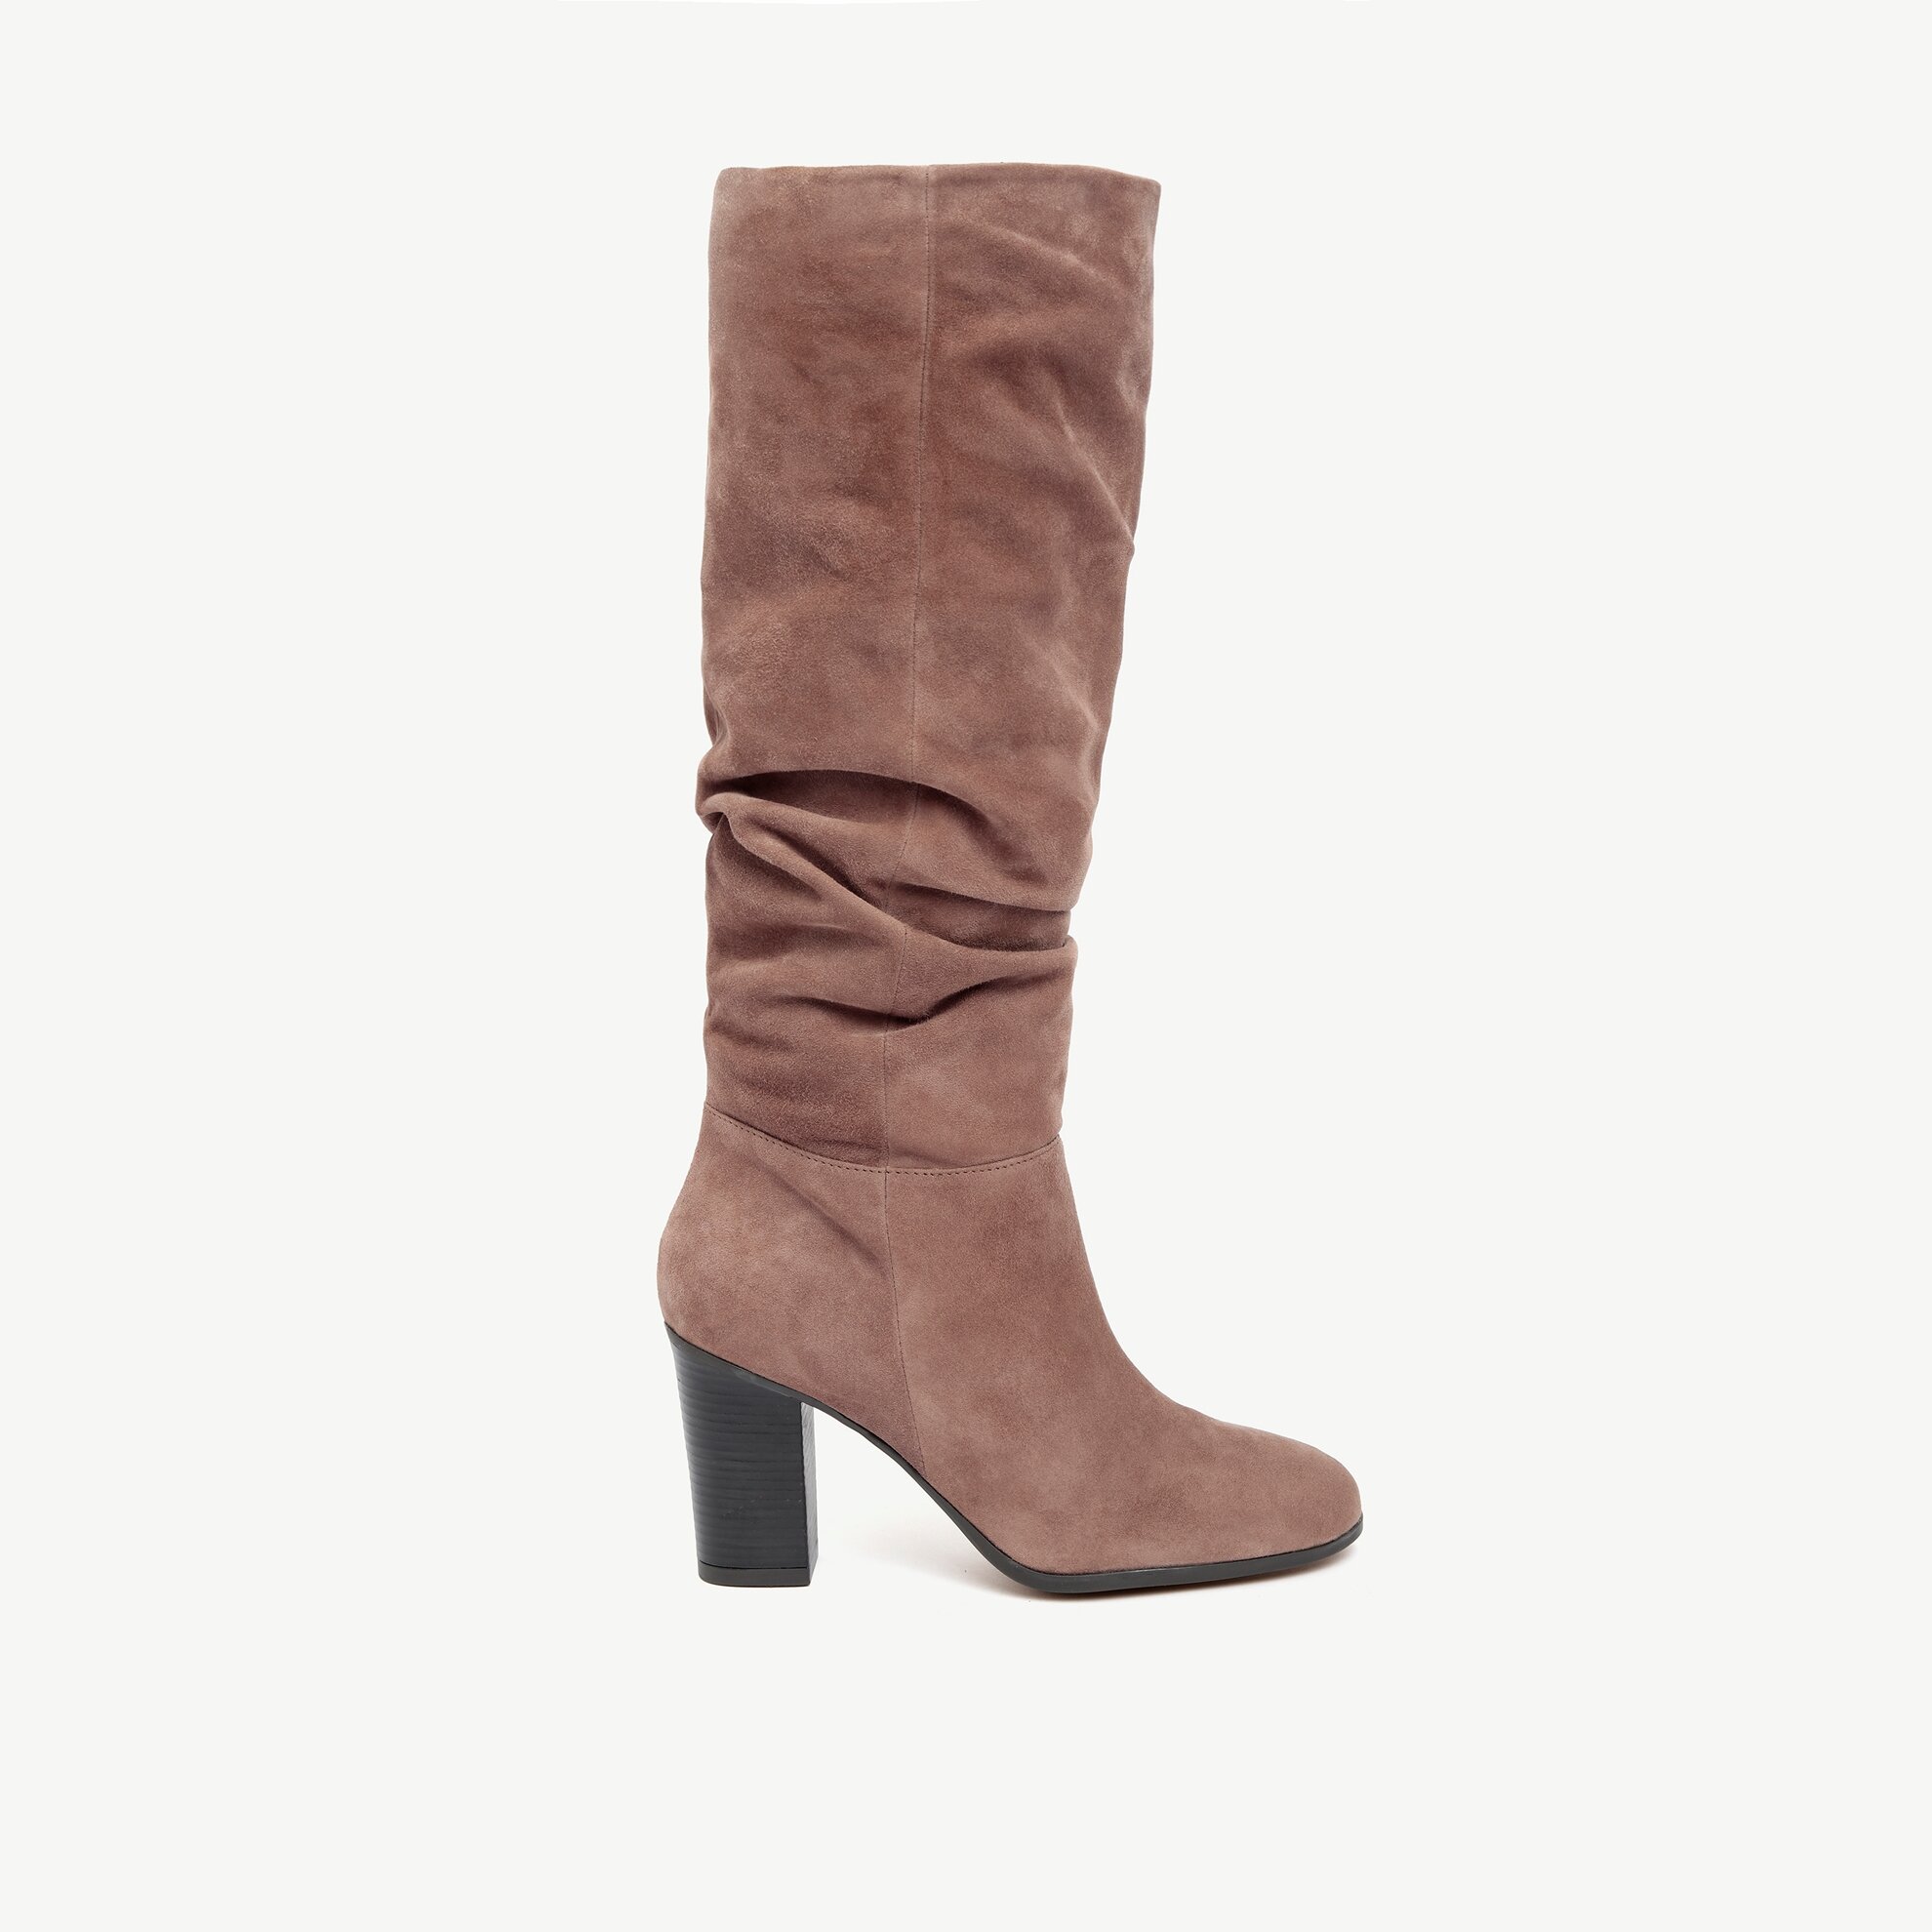 Suede Leather High Heel Long Boot